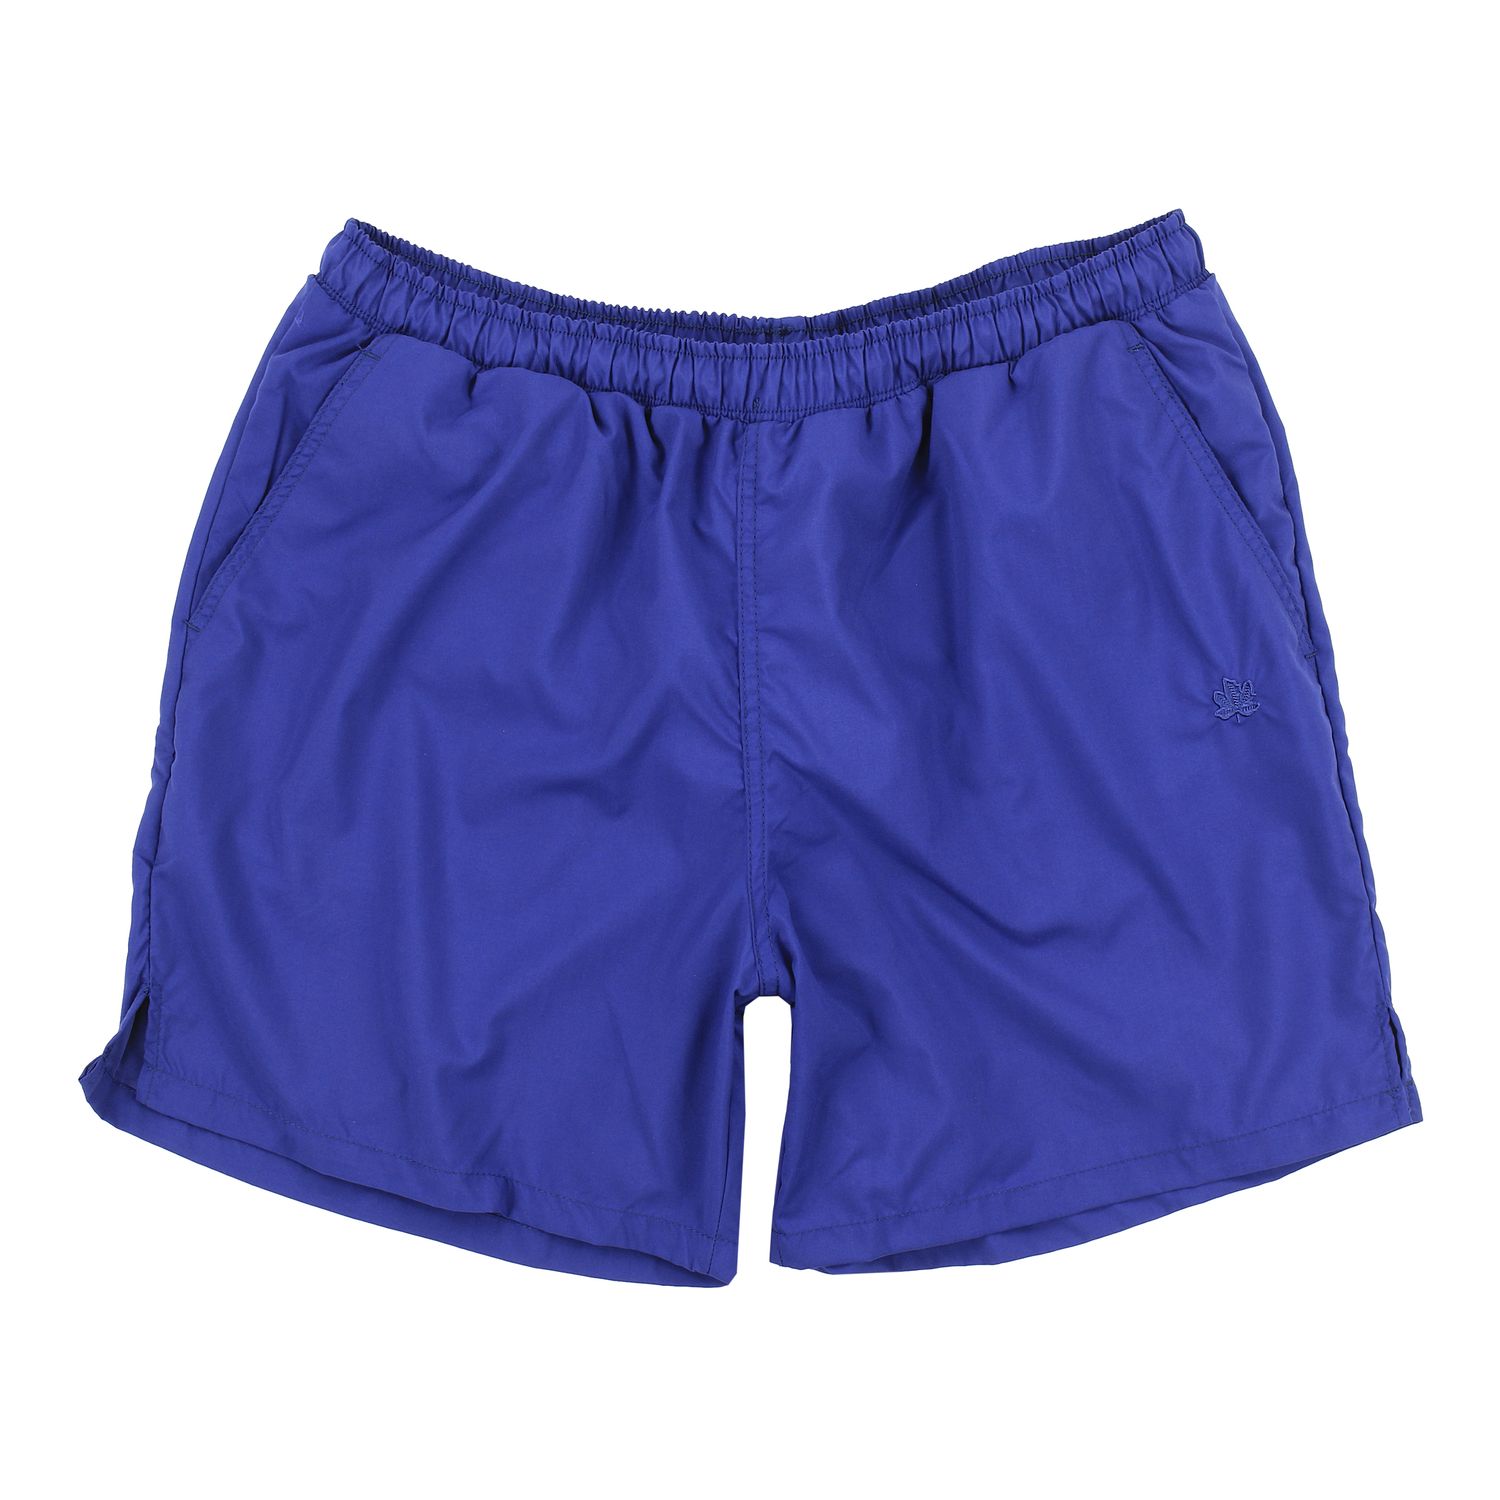 Fitness and swim shorts in royal blue by Ahorn Sportswear up to oversize 10XL